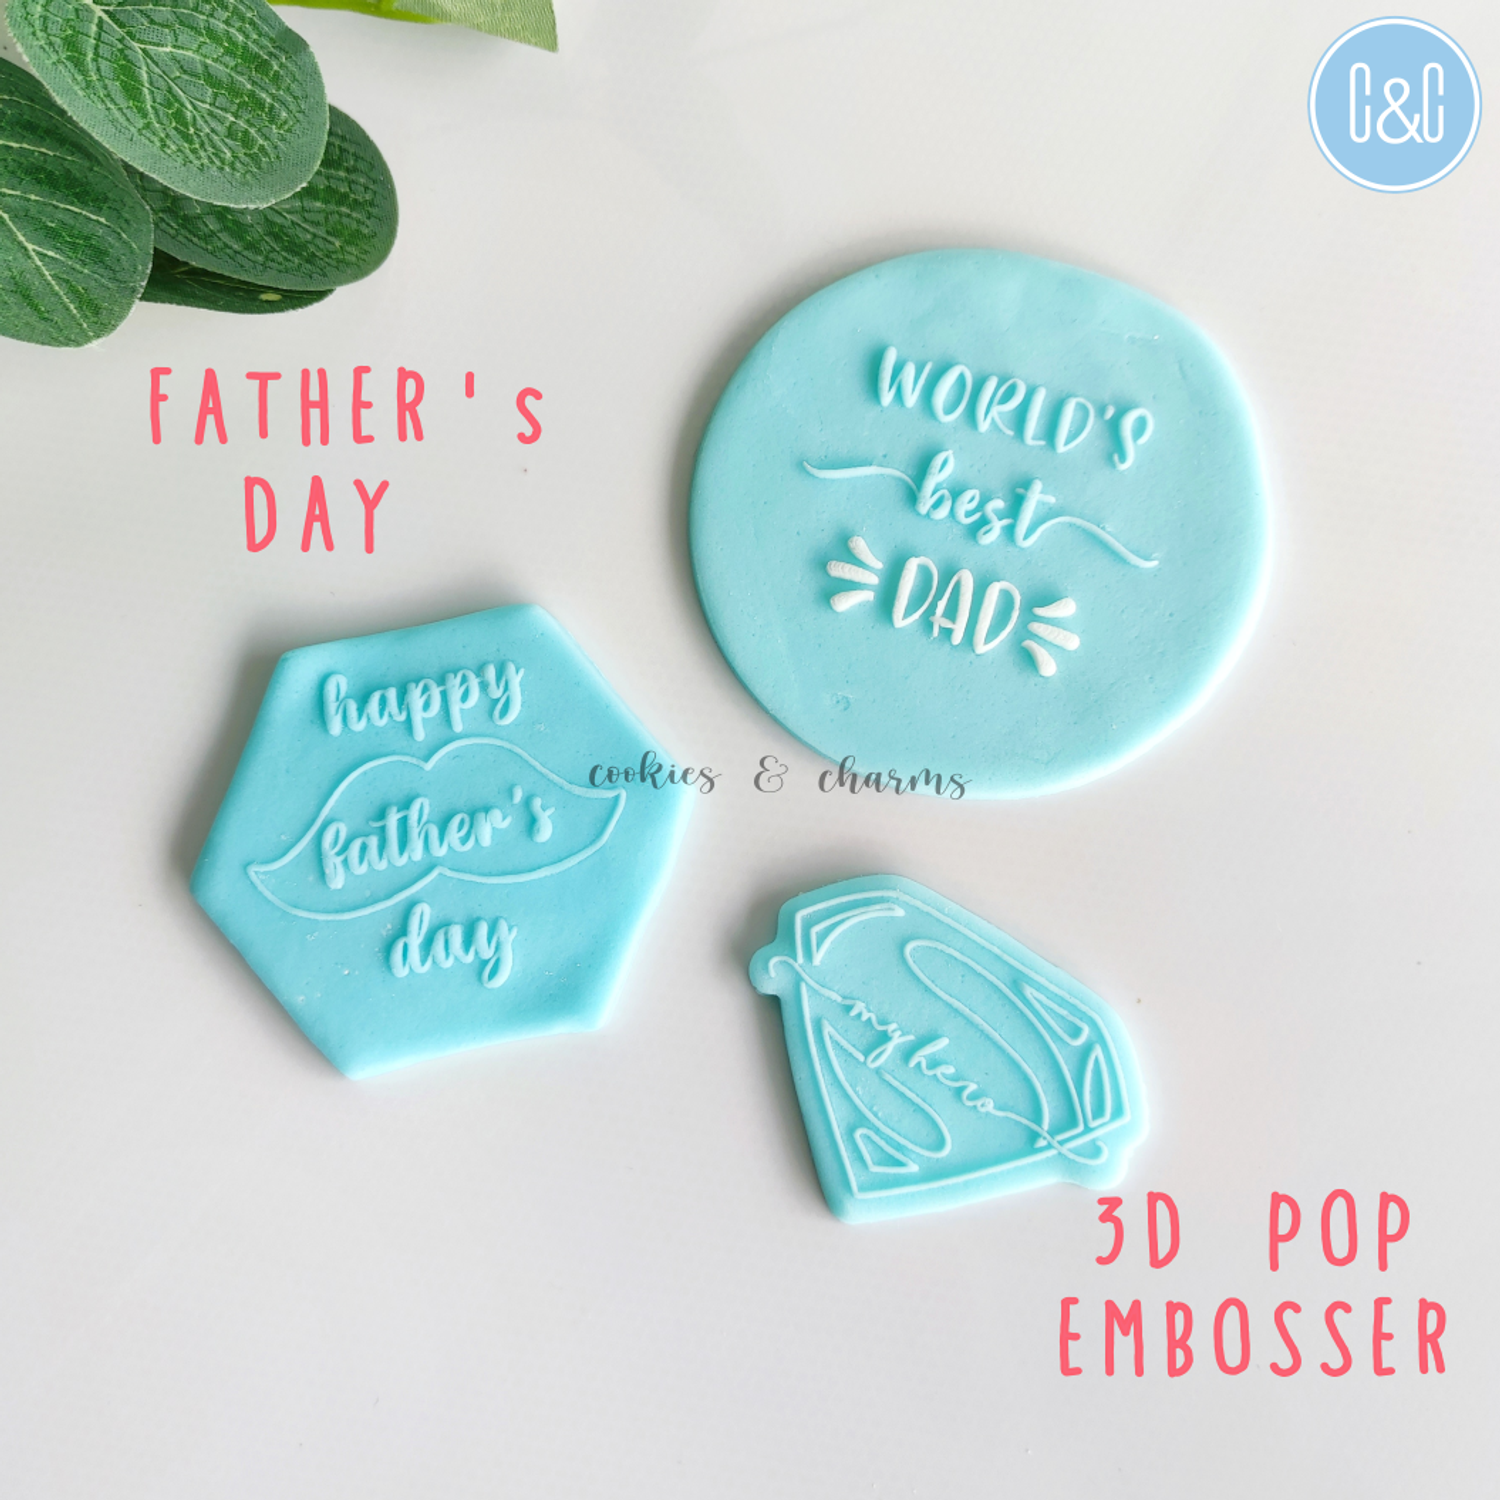 Cookies And Charms | Father's Day 